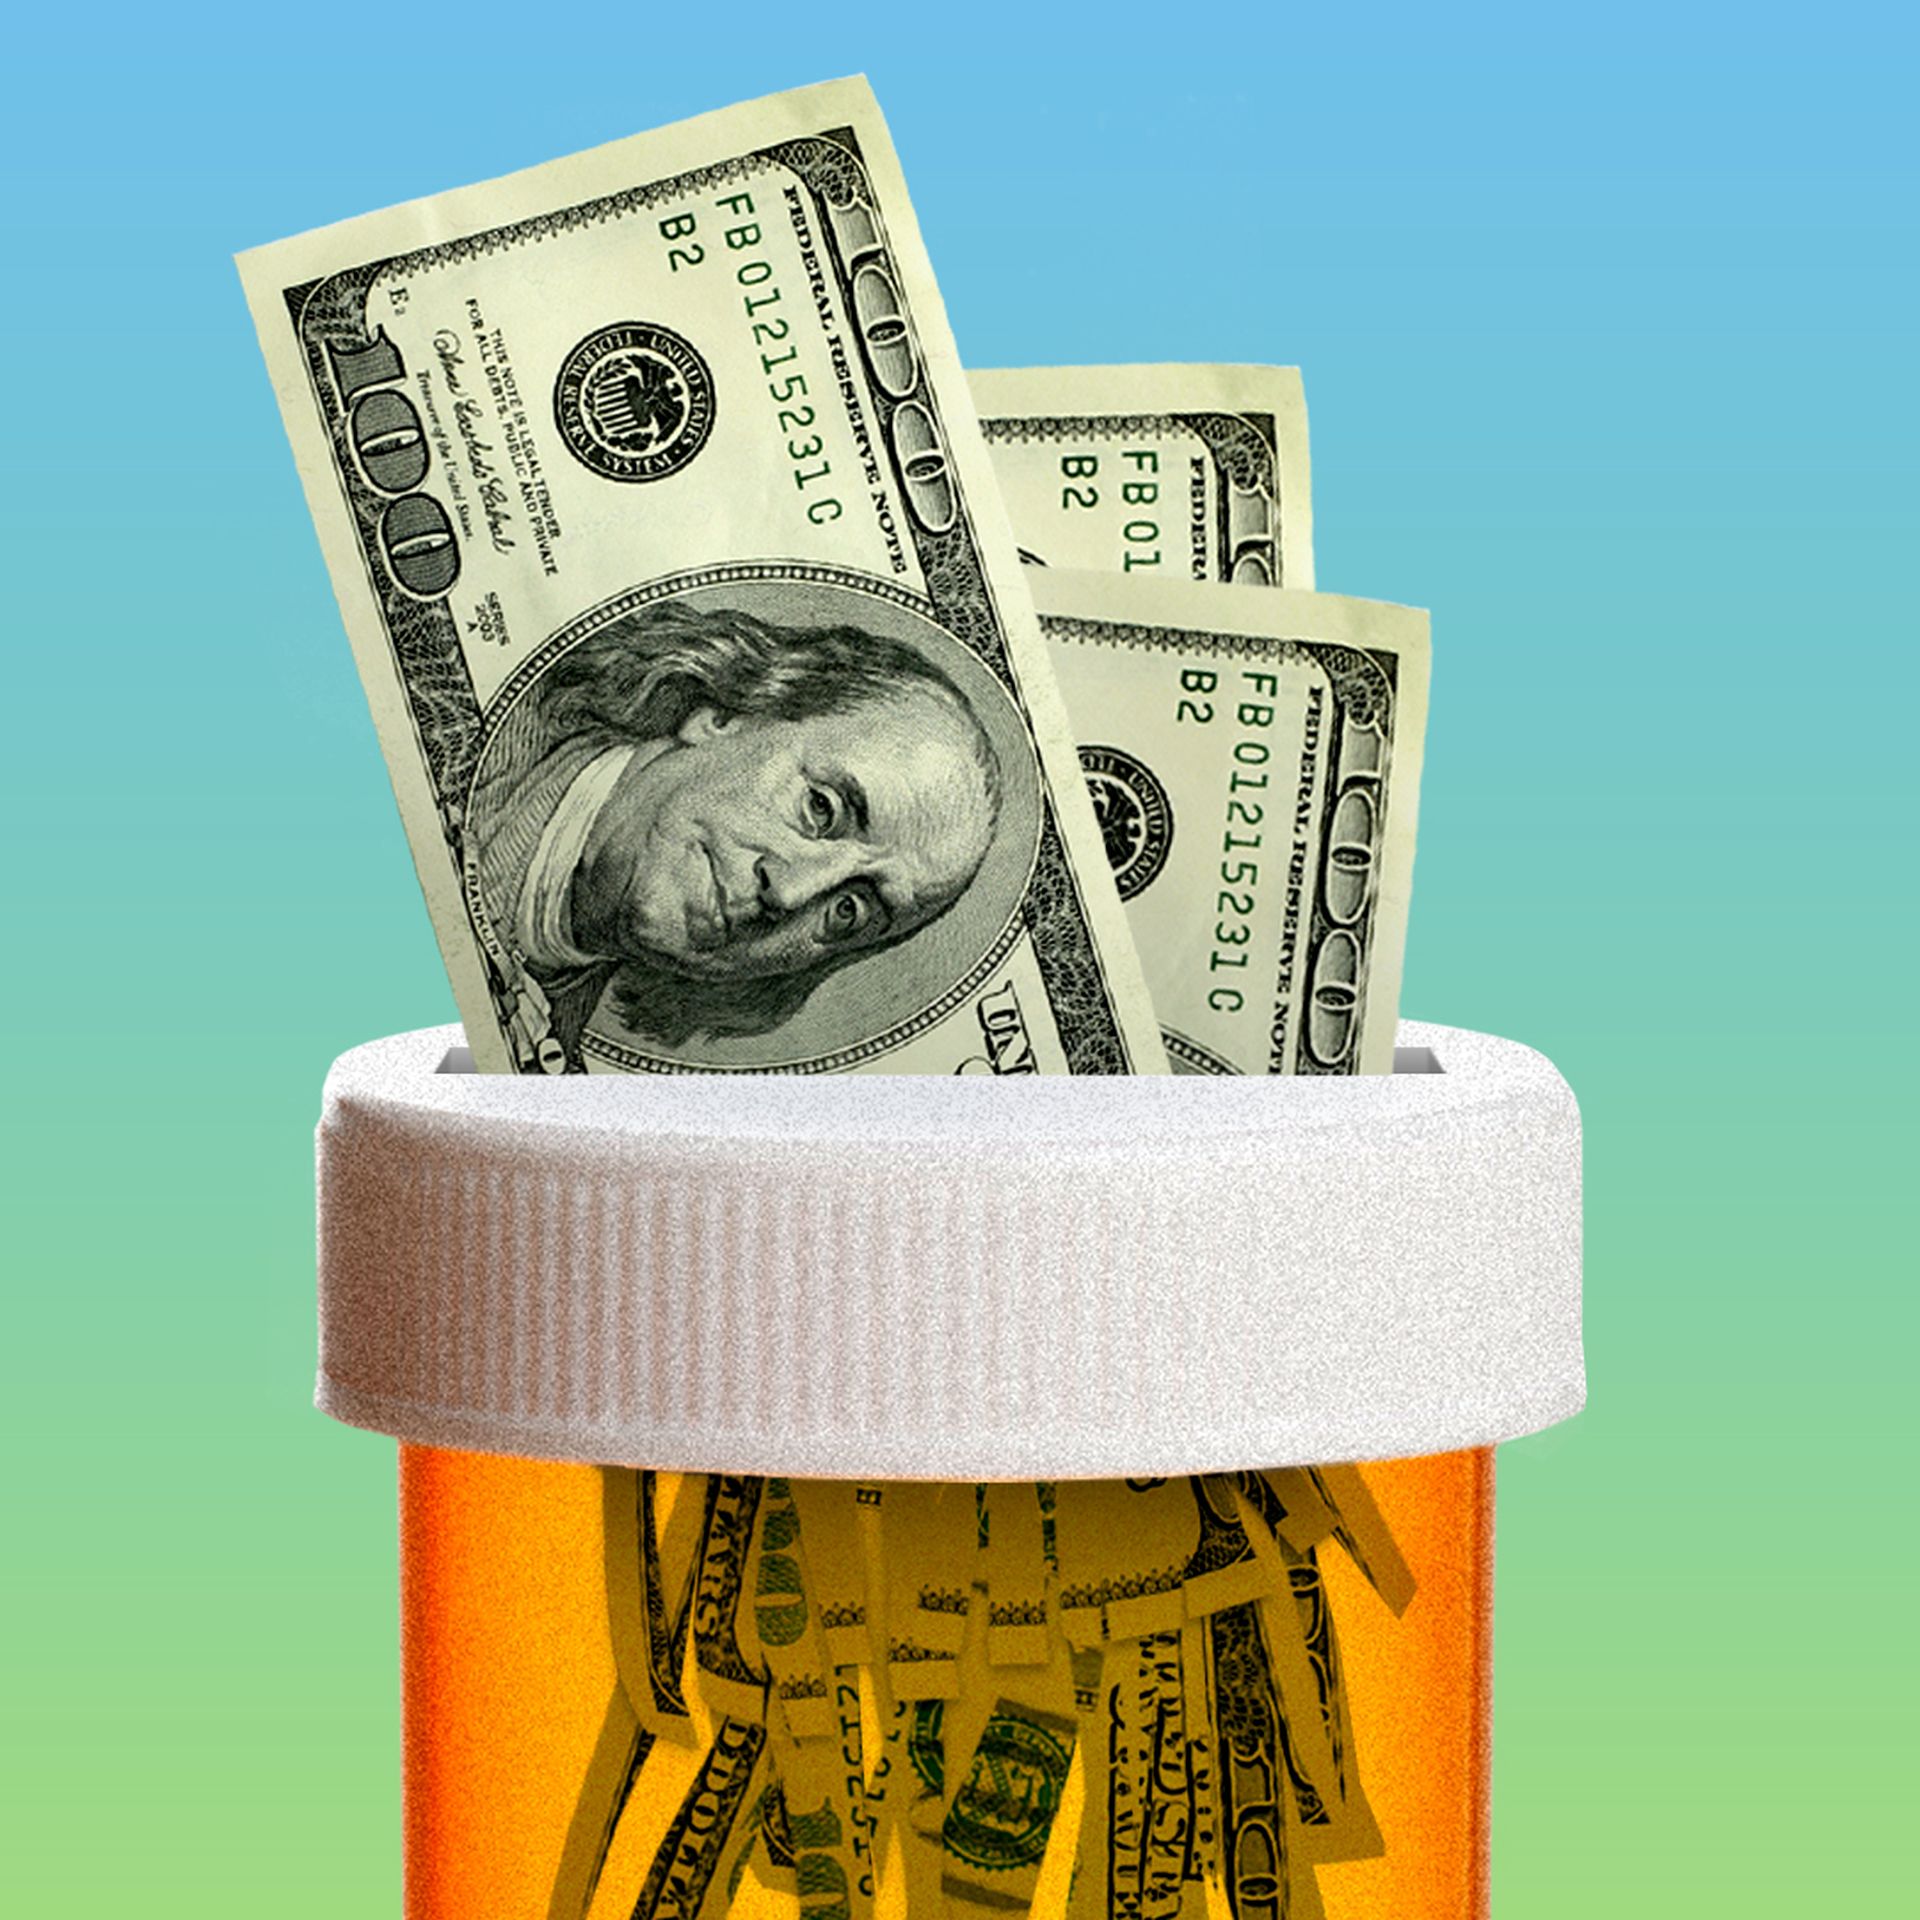 How big firms and PBMs work the drug pricing system